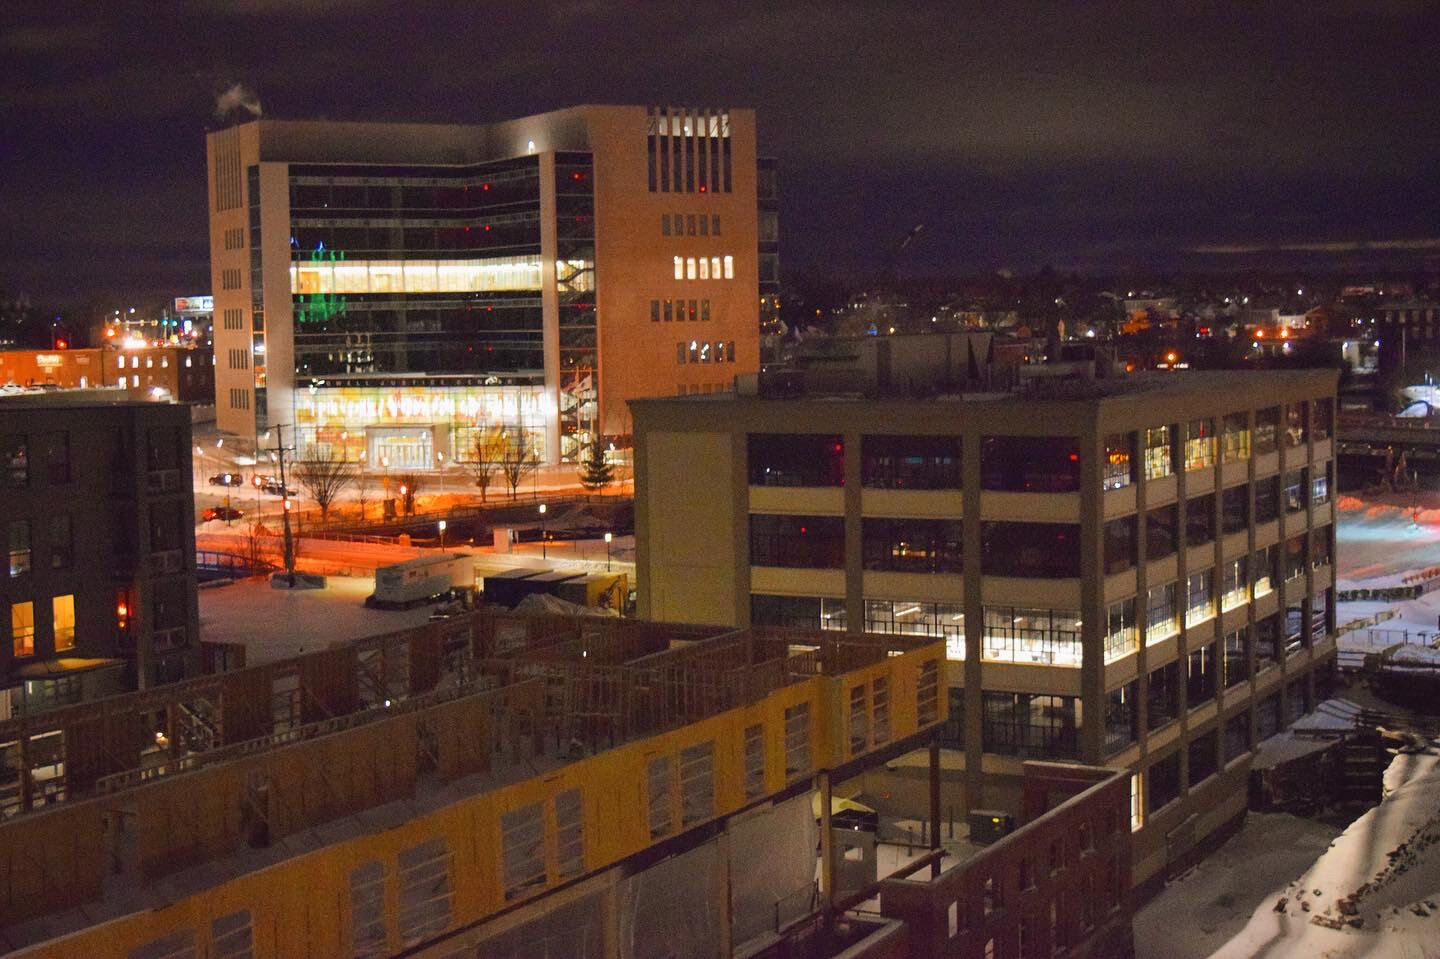 The new Lowell Justice Center, the UMass Lowell M2D2 Innovation Hub, and a new building under construction are visible in the Hamilton Canal Innovation District from the top of a new parking garage built as part of the district’s ongoing development. SUN/Robert Mills